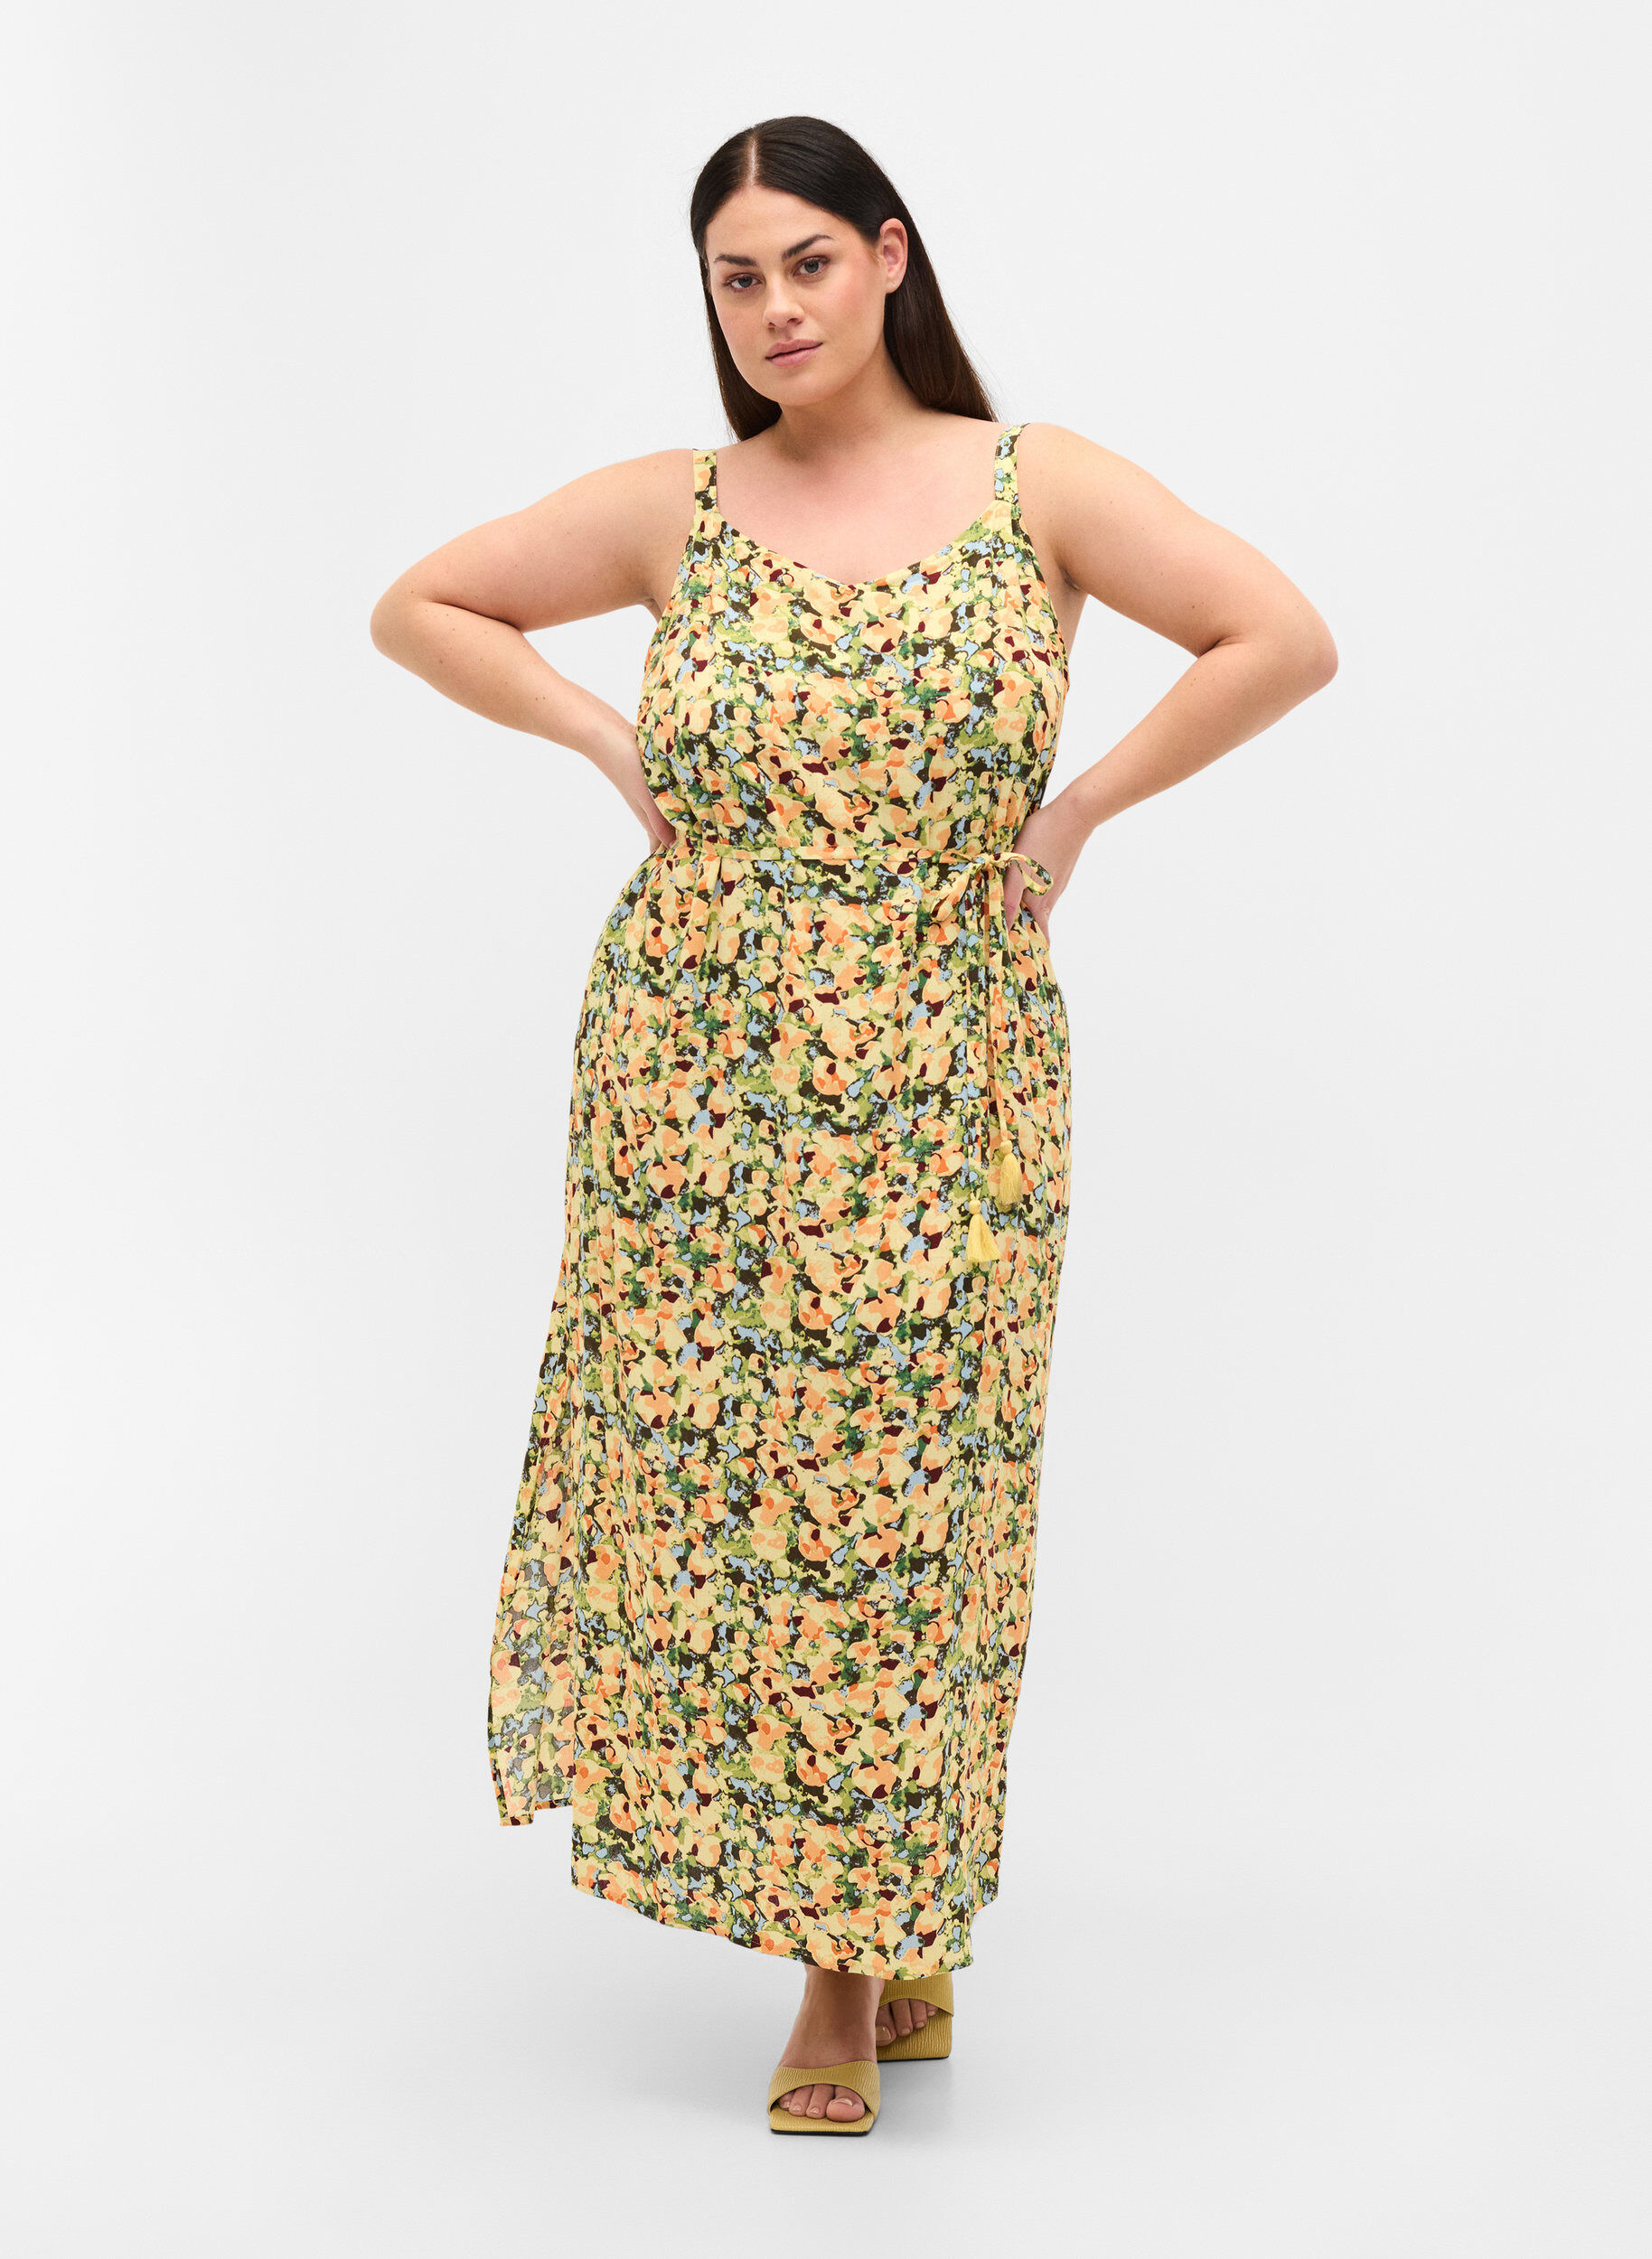 aihihe Womens Casual Sleeveless Plus Size Loose Long Maxi Dresses with Pocket Floral Printed Loose Swing Long Dress 